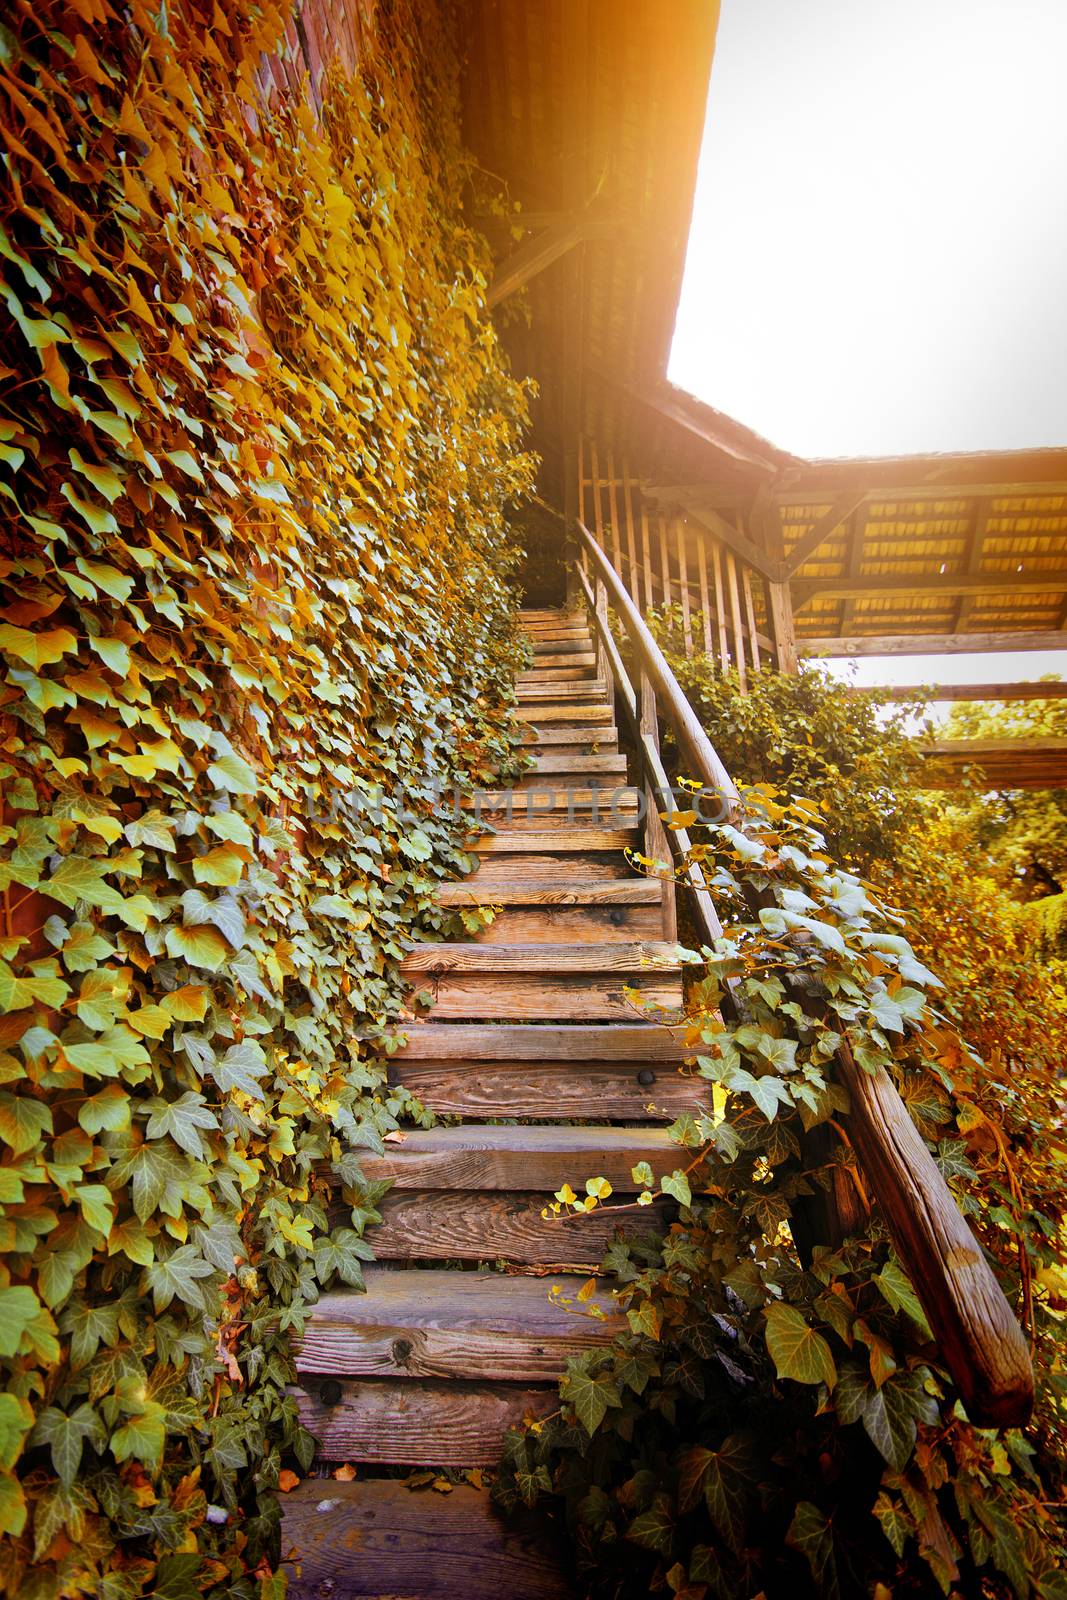 Old wooden stairs to the light covered with autumn leaves.